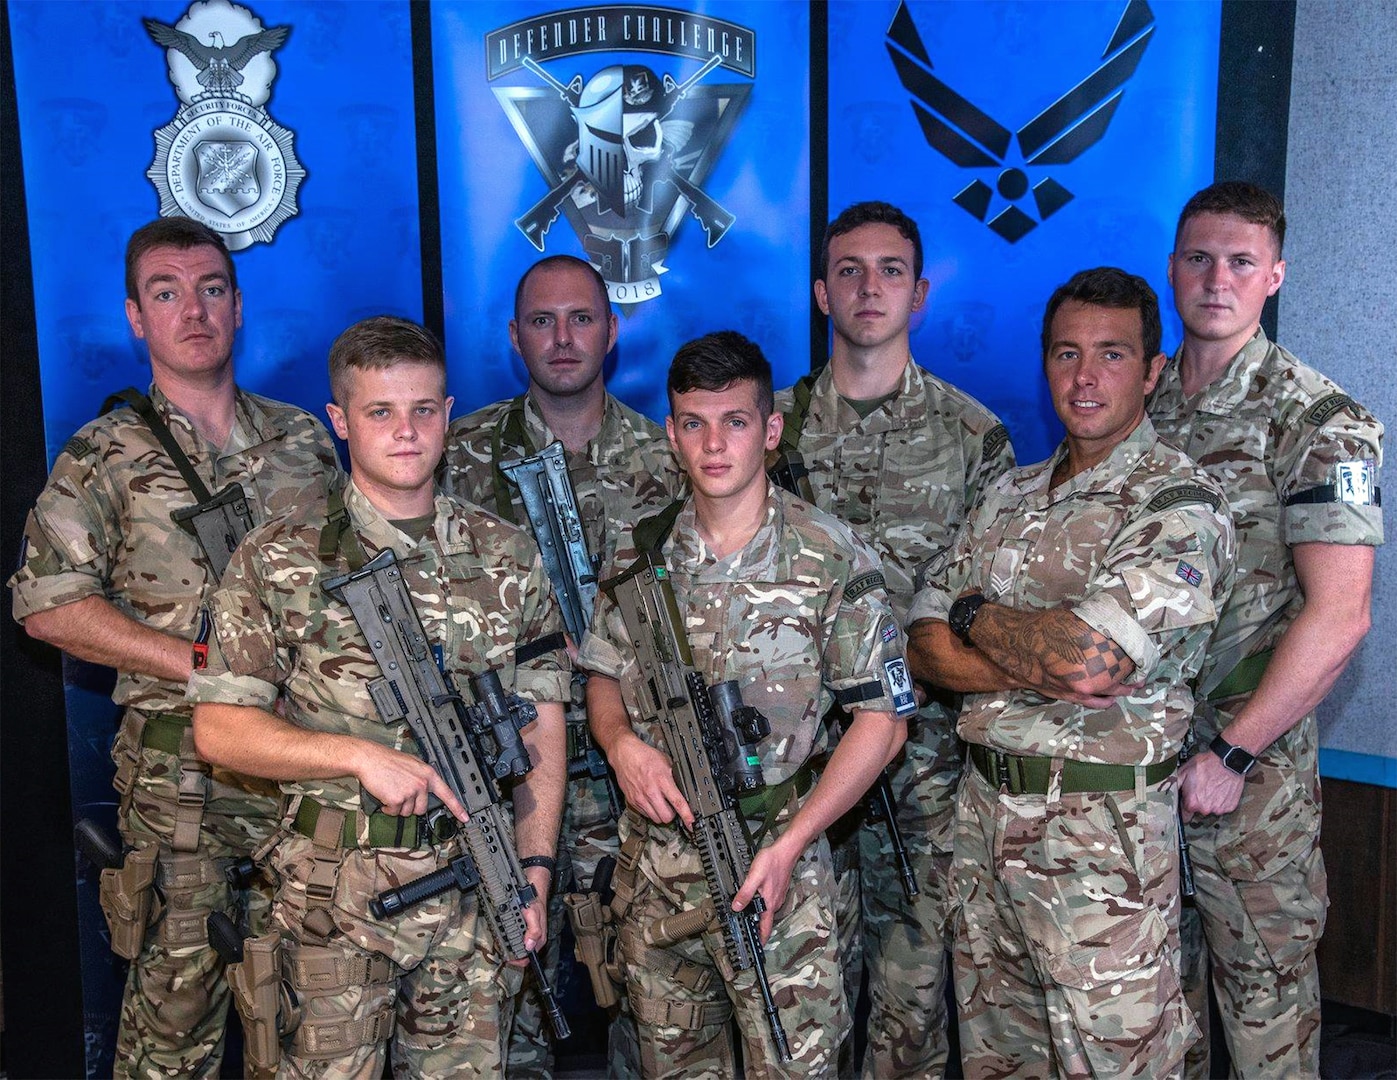 The team representing the Royal Air Force, from left to right, Flight Lt. Dominic Hulton, Lance Cpl. Adam Butler, Senior Aircraftman John Catlow, Senior Aircraftman Levi Hague, Lance Cpl. Richard Hislop and Cpl. Matthew Simmons.